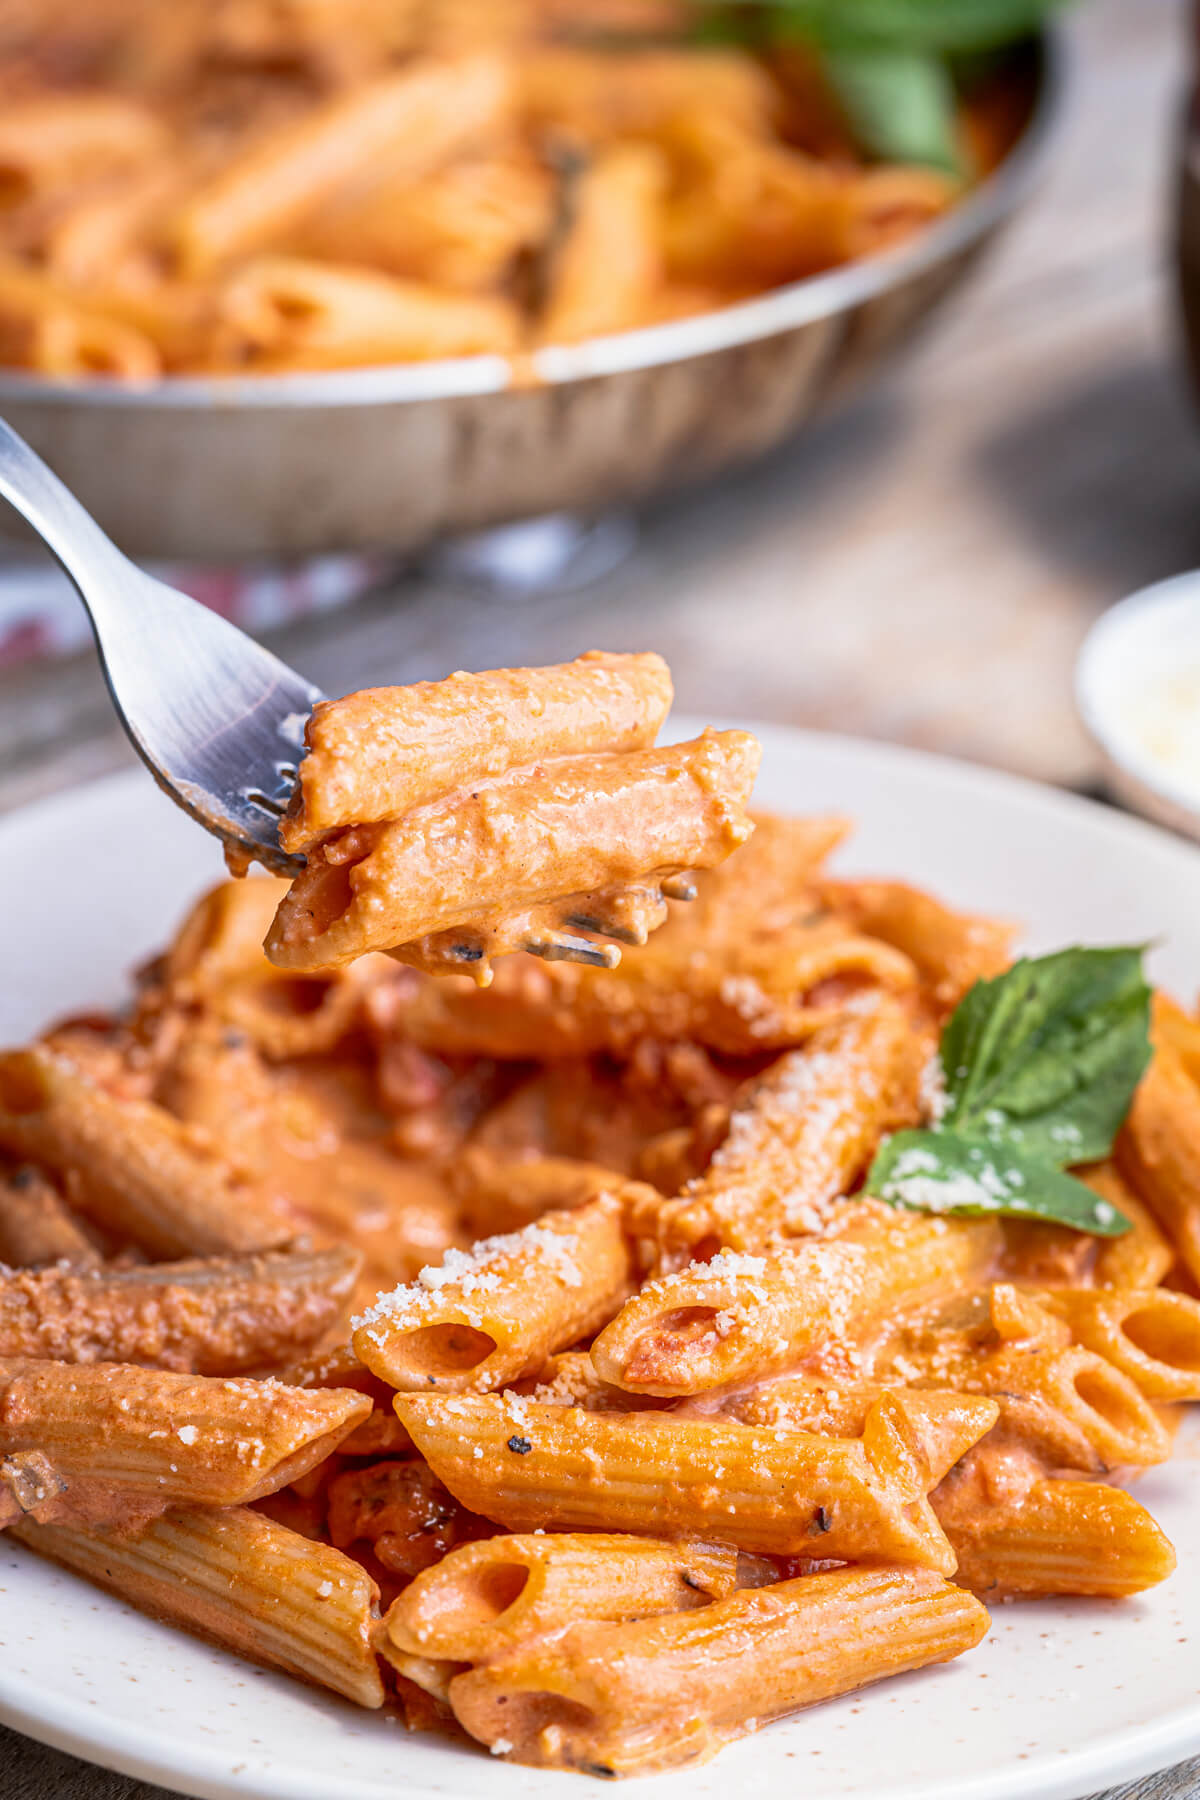 A fork filled with penne pasta in Rosé sauce garnished with grated Parmesan and fresh basil leaves.